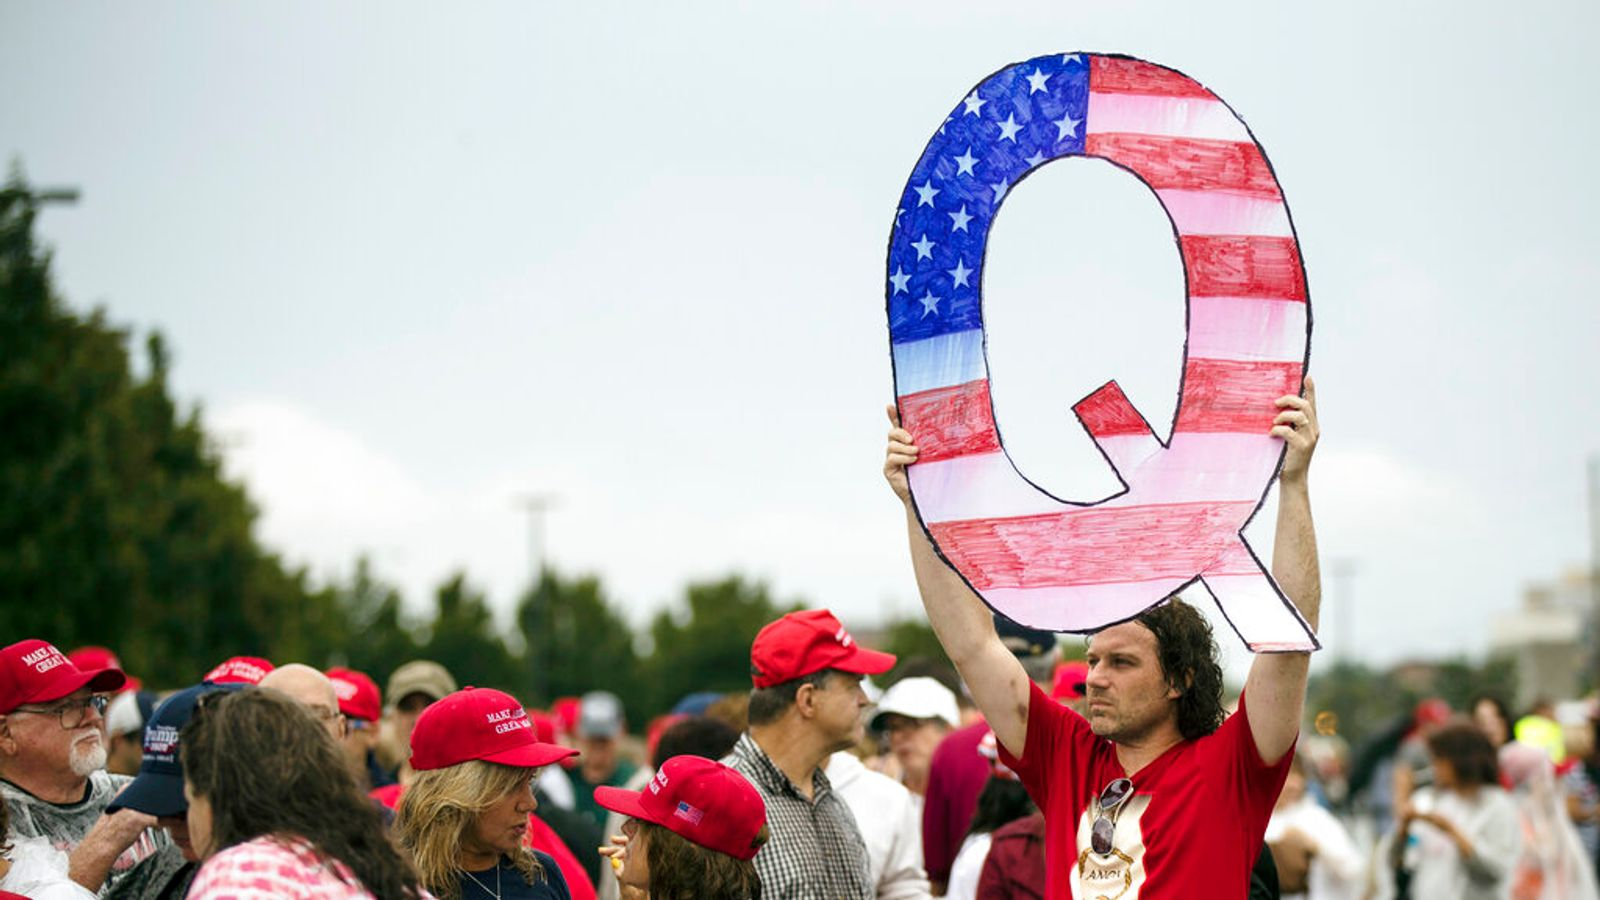 FACTS about QAnon: What it is, Who is “Q”, Who believes, How spread online